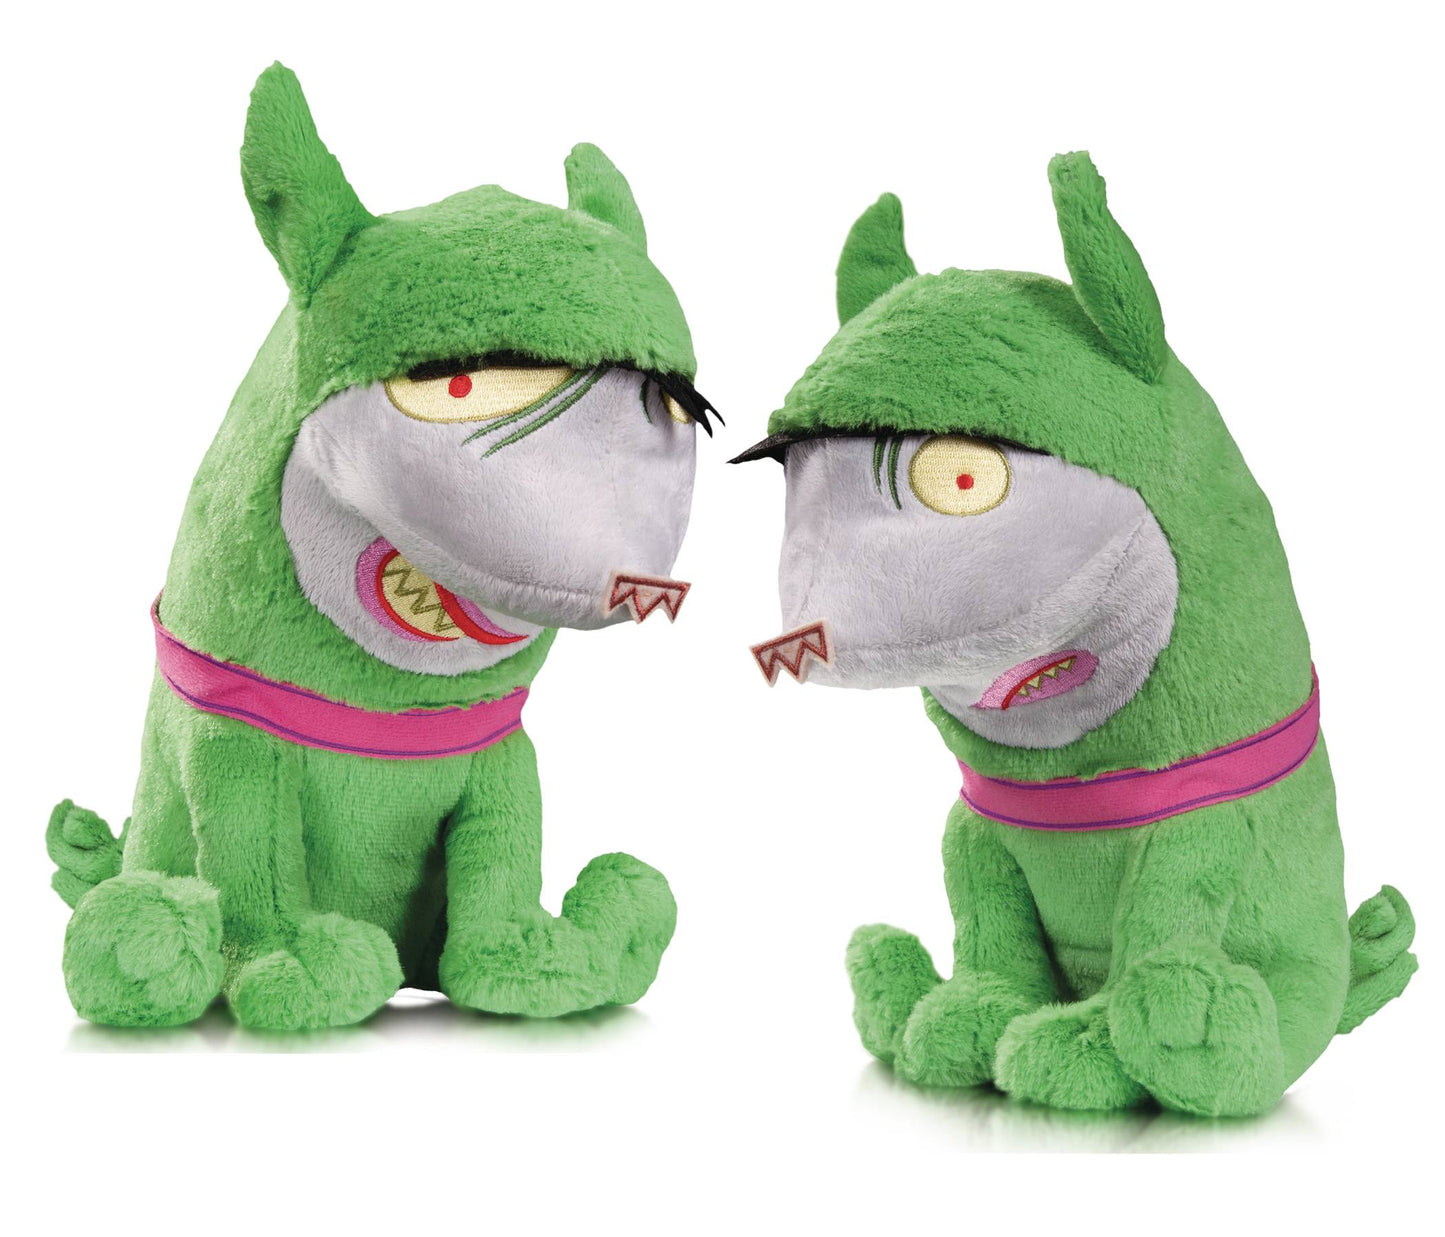 DC Super Pets Crackers & Giggles Plush 2-Pack